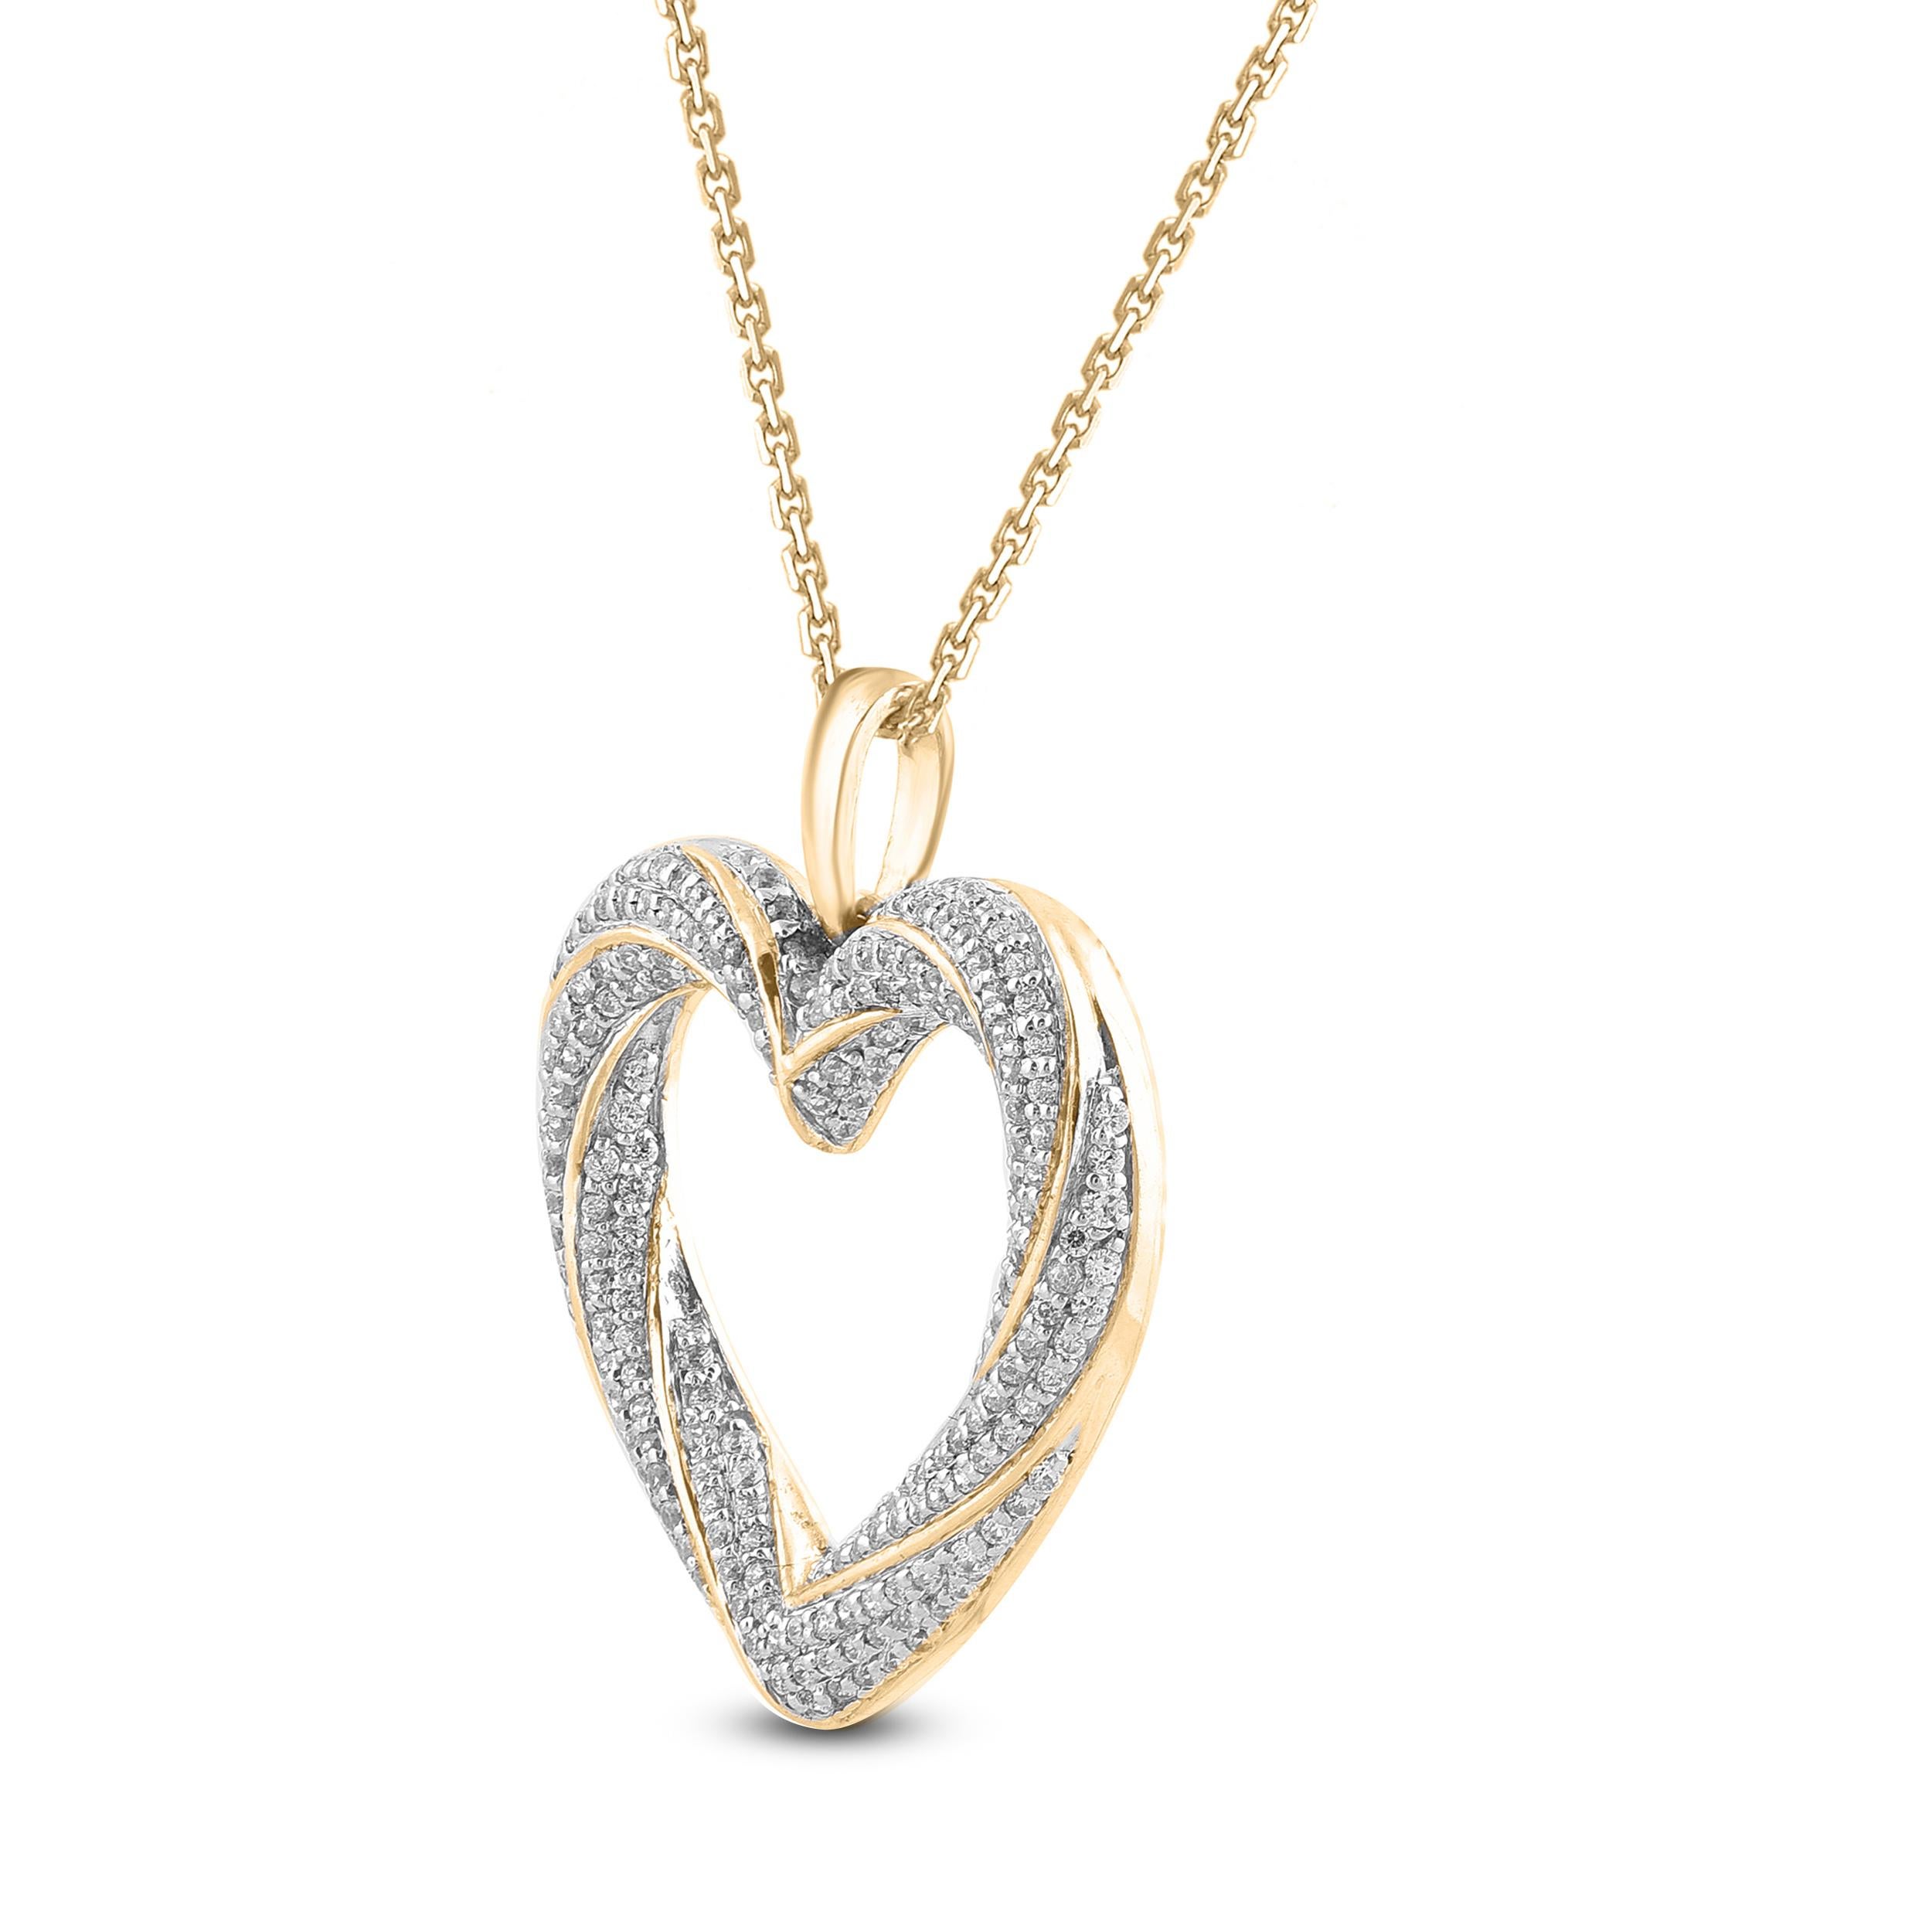 Bring charm to your look with this diamond heart pendant. The pendant is crafted from 14-karat yellow gold and features round 233 white diamonds in pave set. H-I color I-2 clarity and a high polish finish complete the Brilliant  sophistication of